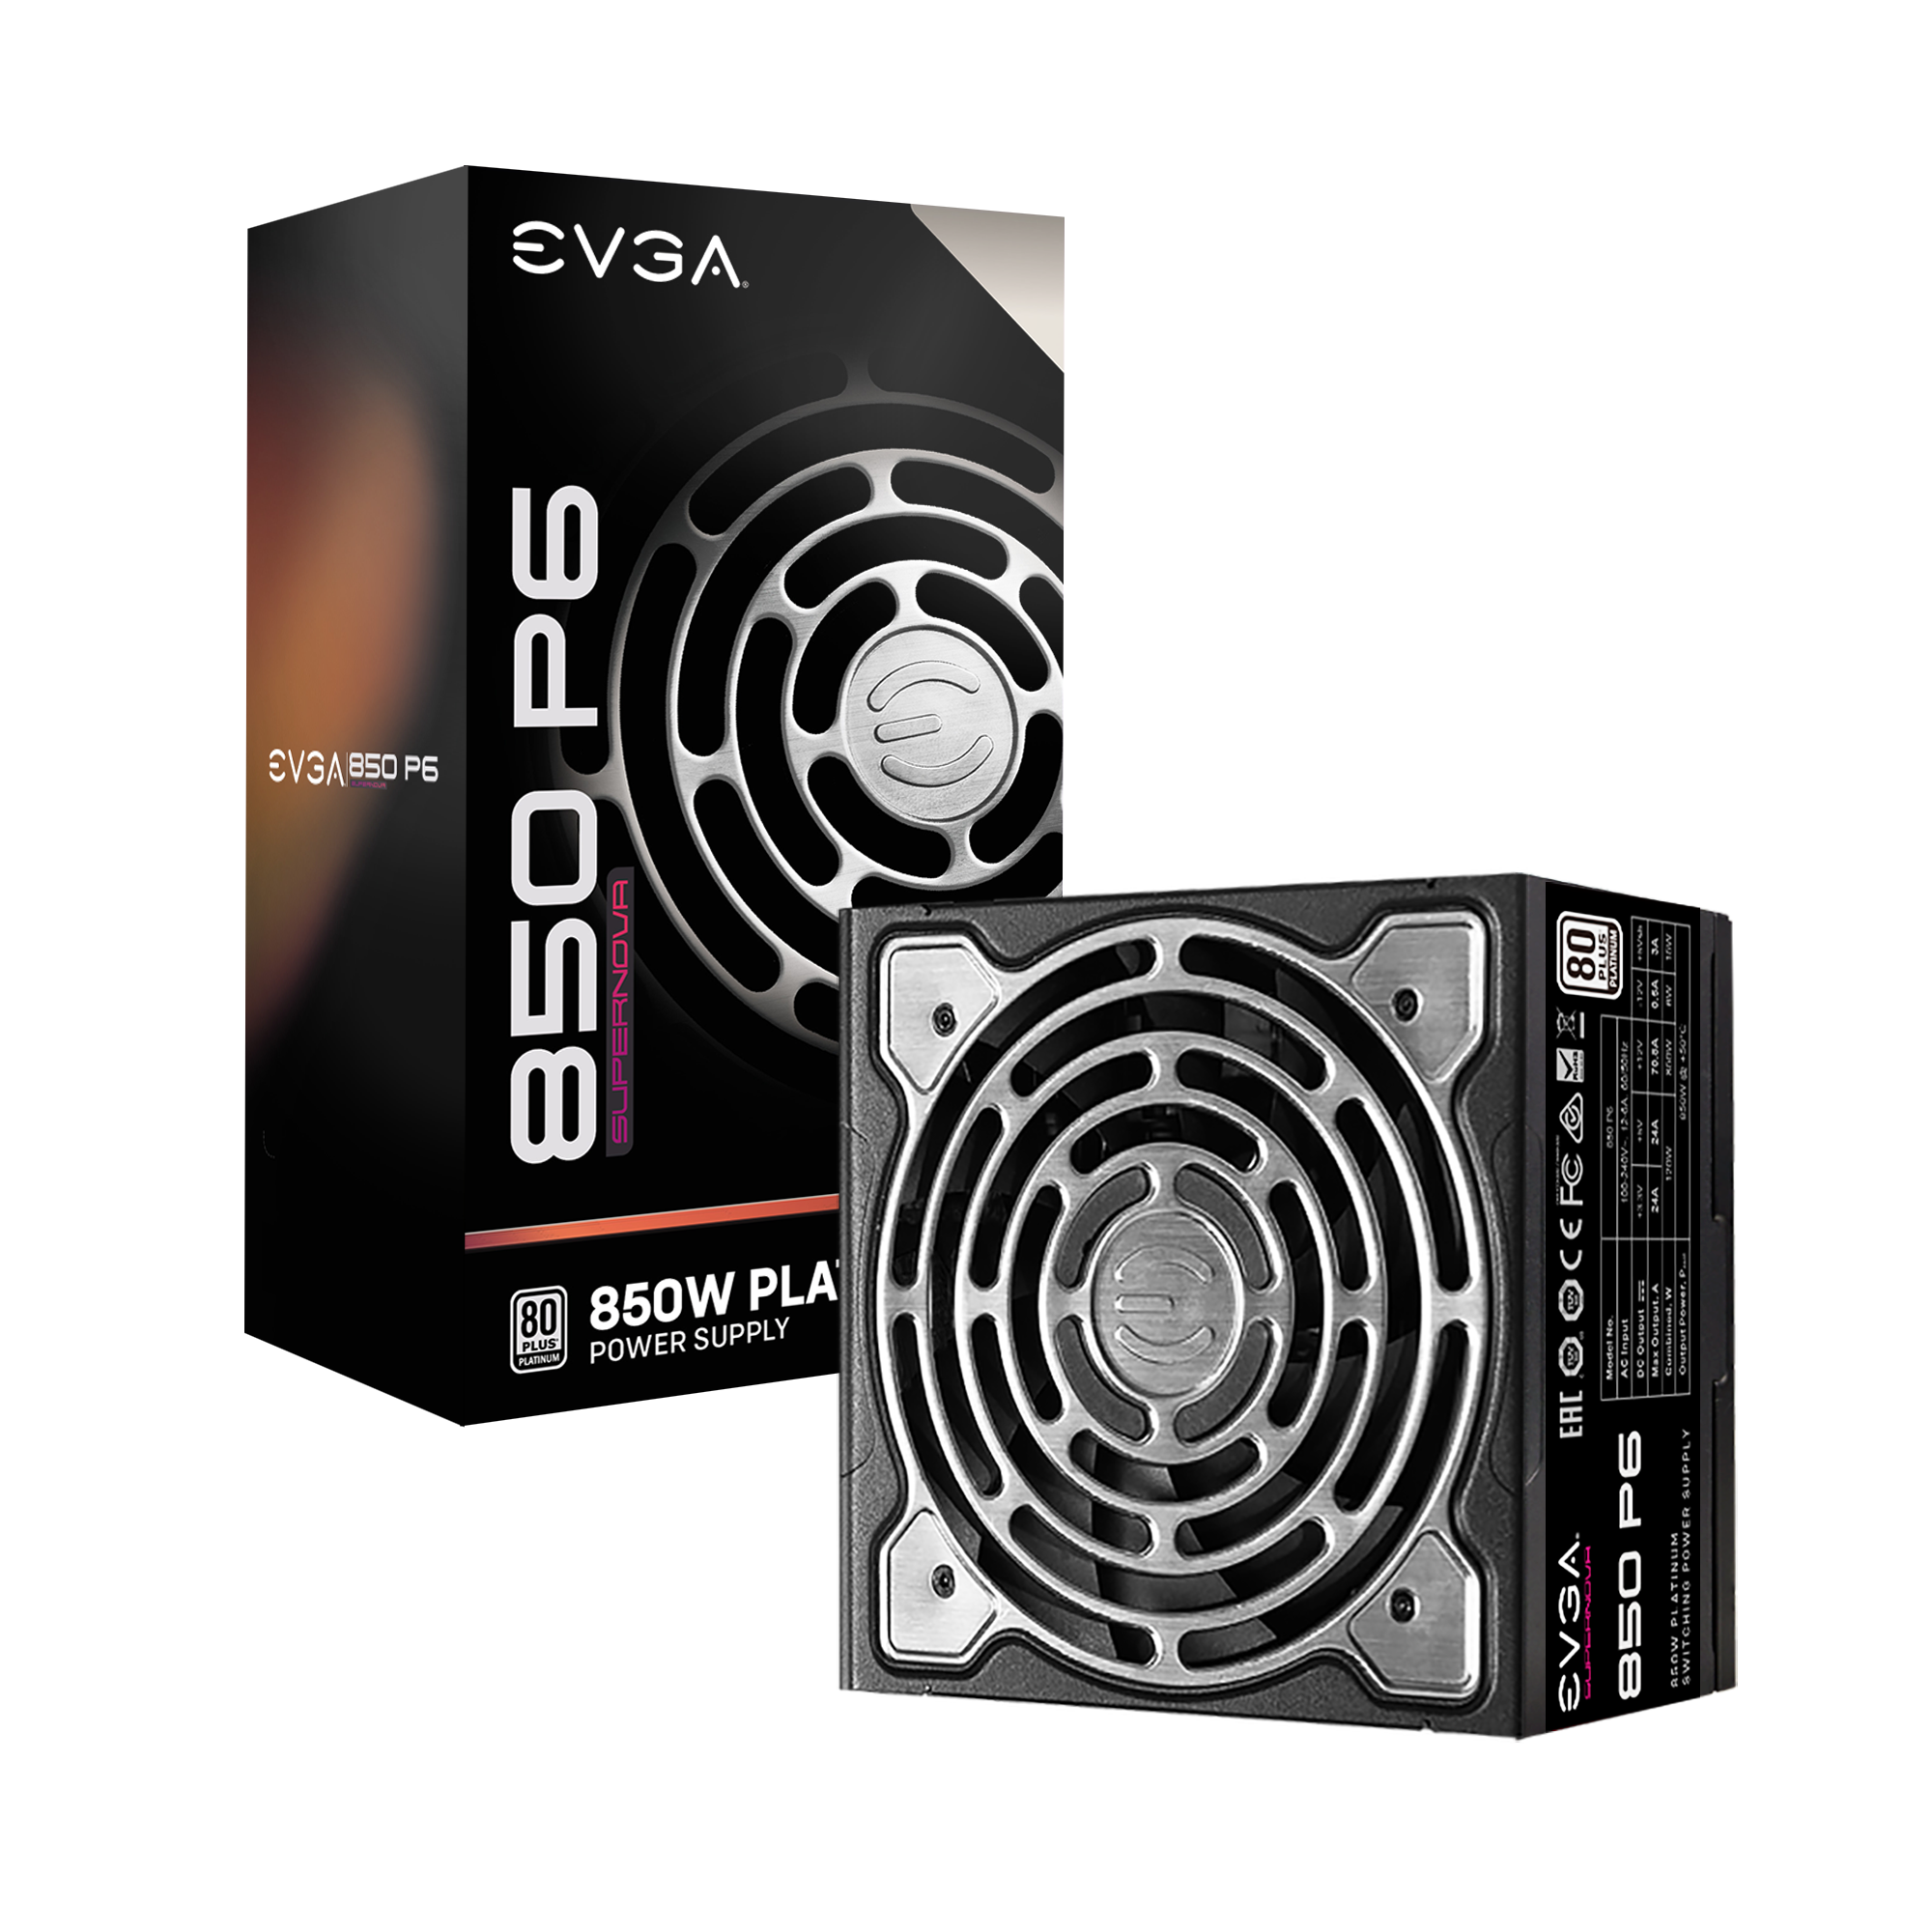 EVGA - Products - EVGA SuperNOVA 850 P6, 80 Plus Platinum 850W, Fully  Modular, Eco Mode with FDB Fan, 10 Year Warranty, Includes Power ON Self  Tester, Compact 140mm Size, Power Supply 220-P6-0850-X1 - 220-P6-0850-X1